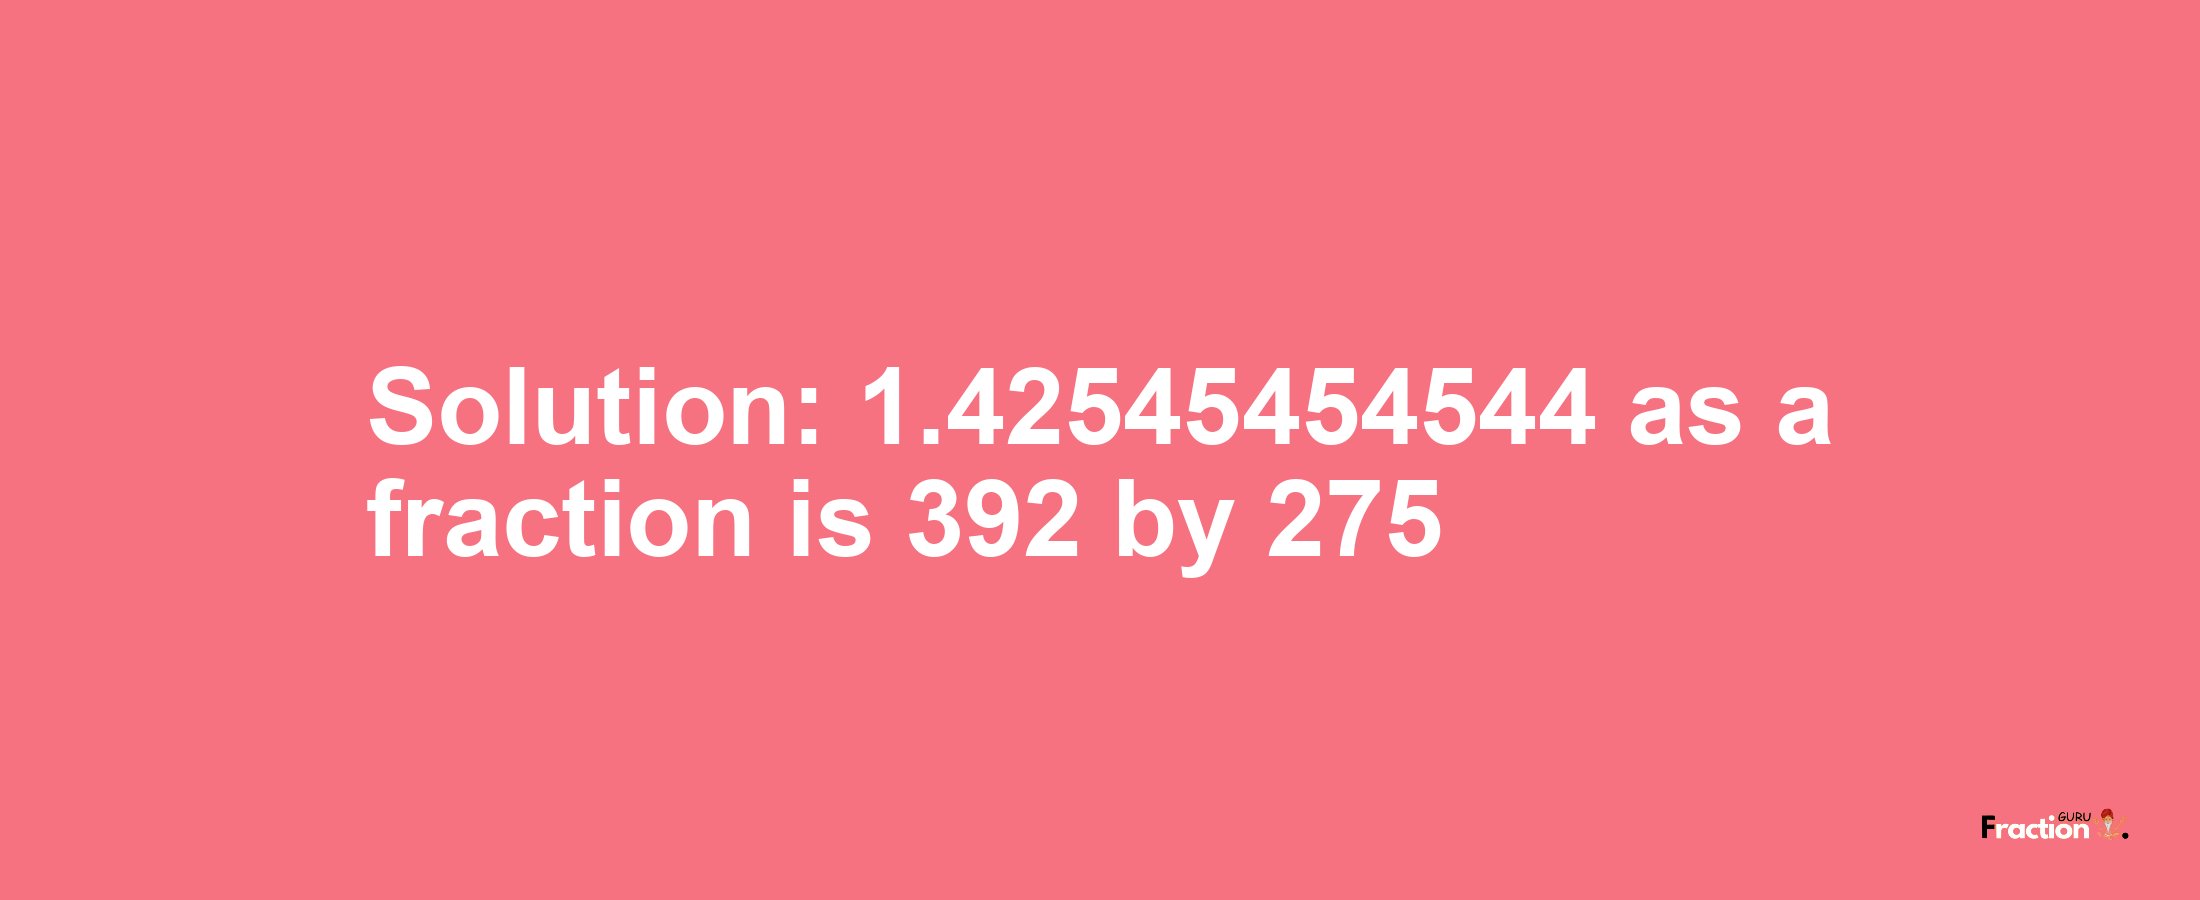 Solution:1.42545454544 as a fraction is 392/275